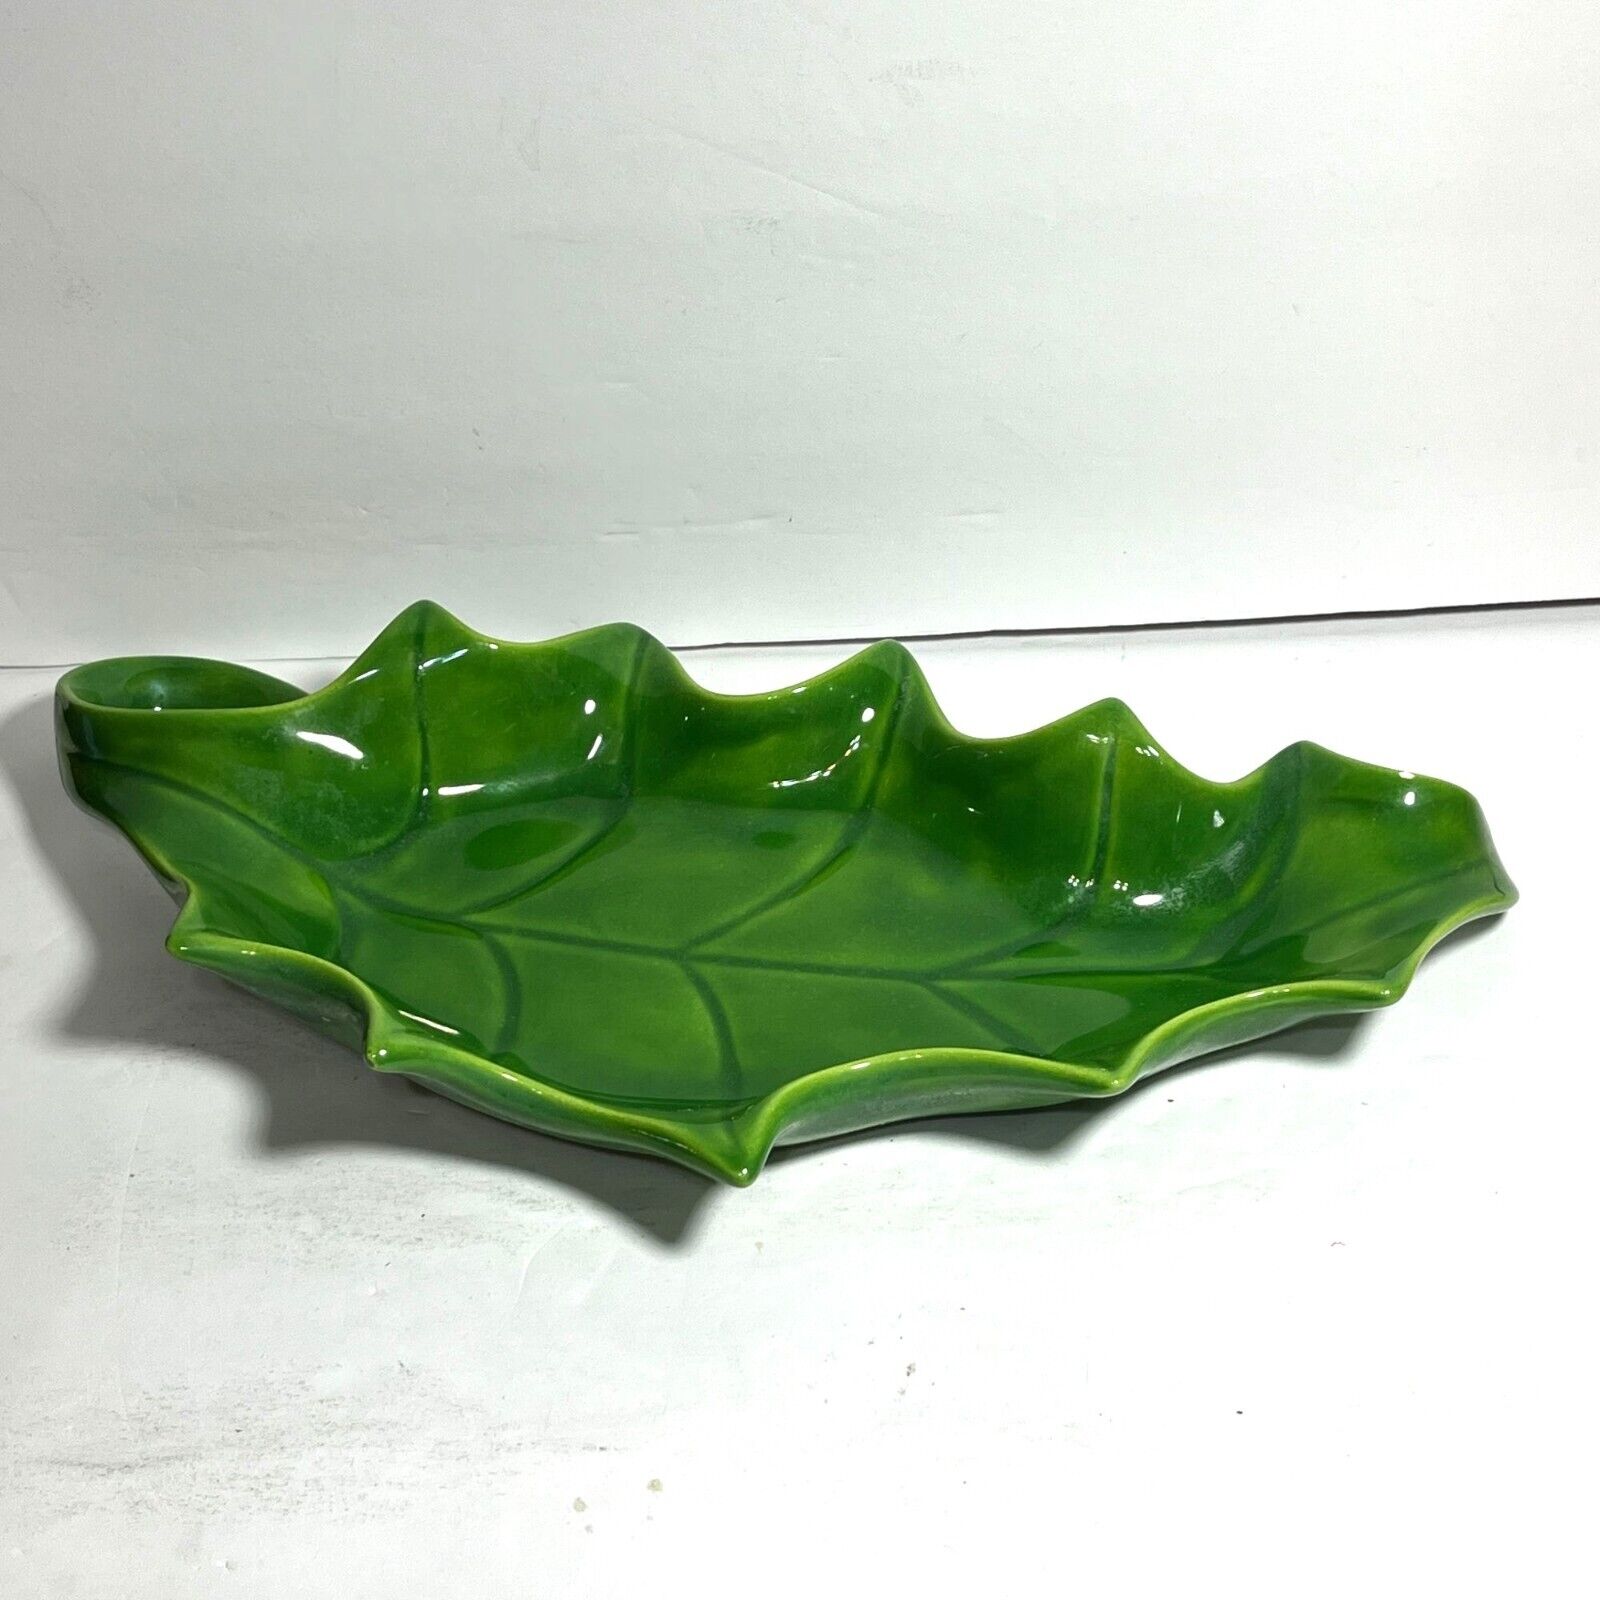 Vintage Green Ceramic Holly Leaf Serving Dish With Handle